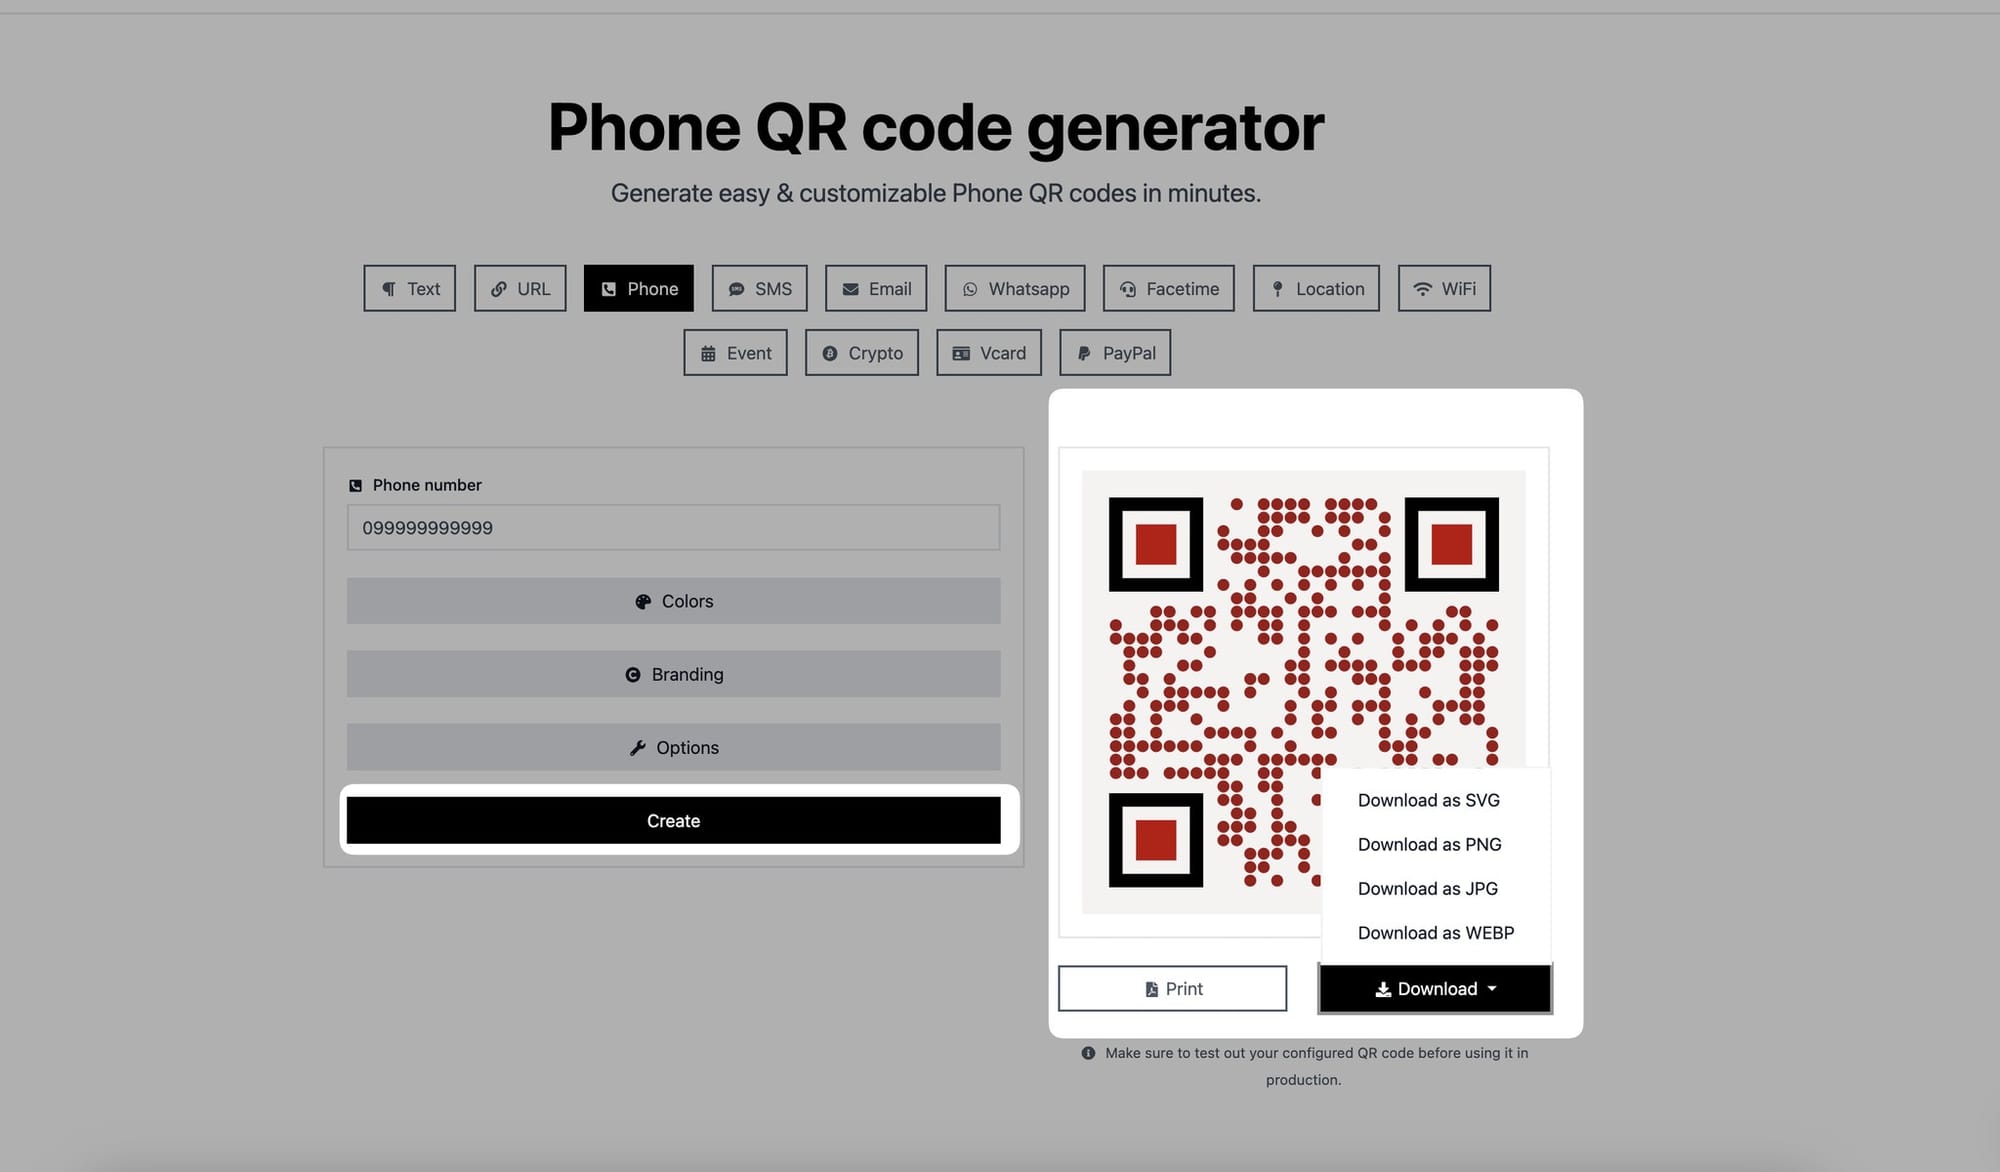 creating and download options of phone qr code